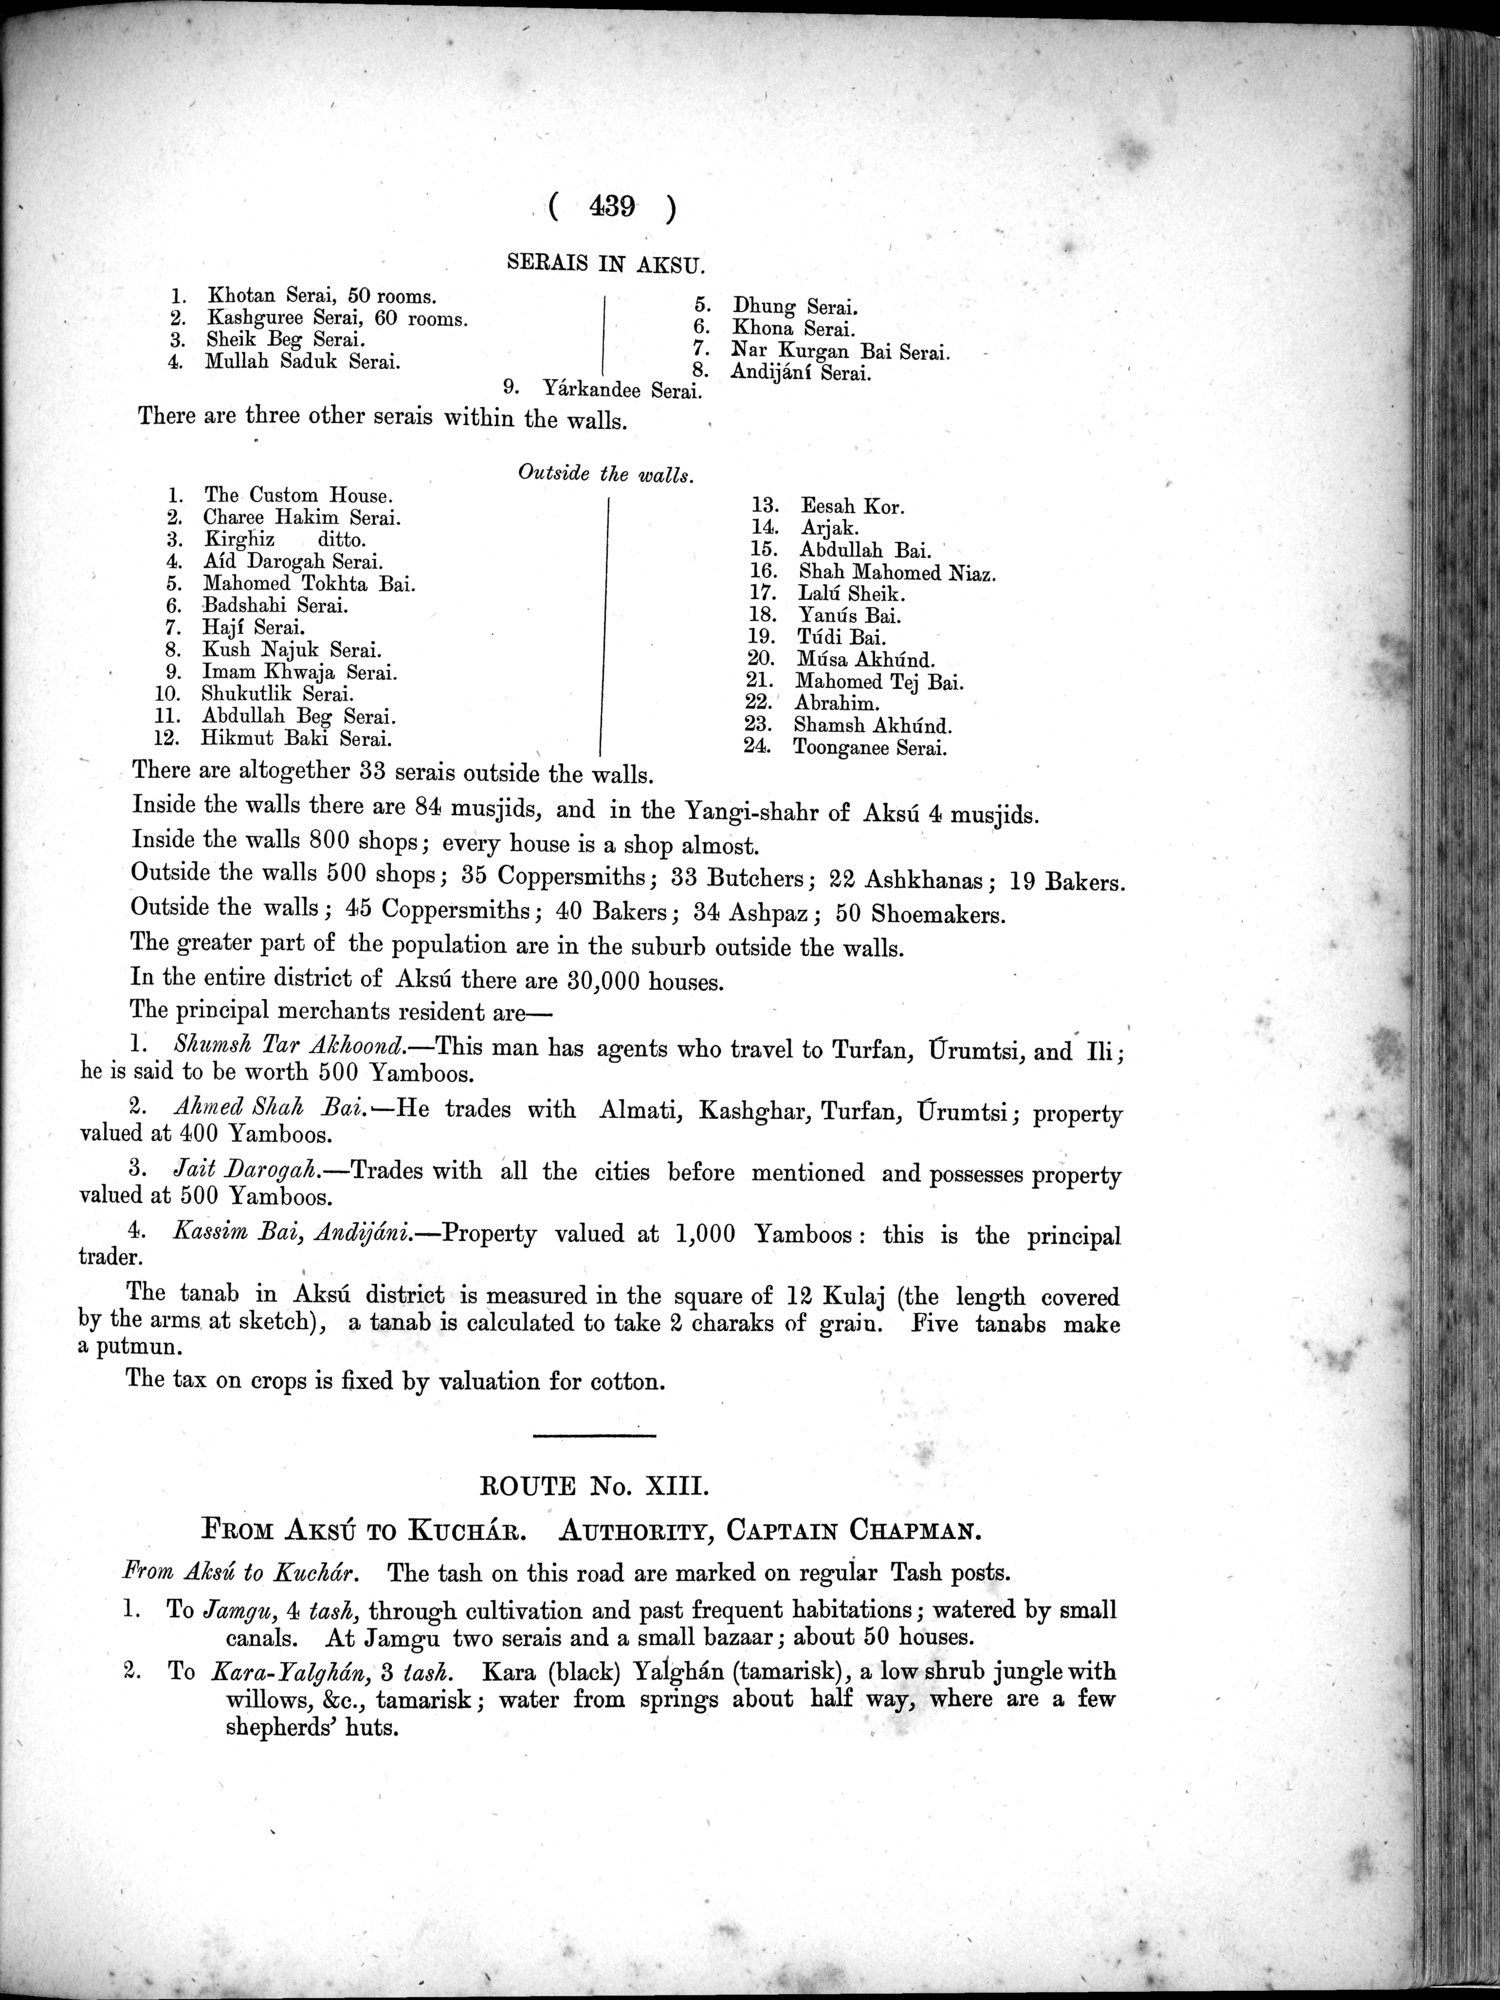 Report of a Mission to Yarkund in 1873 : vol.1 / Page 573 (Grayscale High Resolution Image)